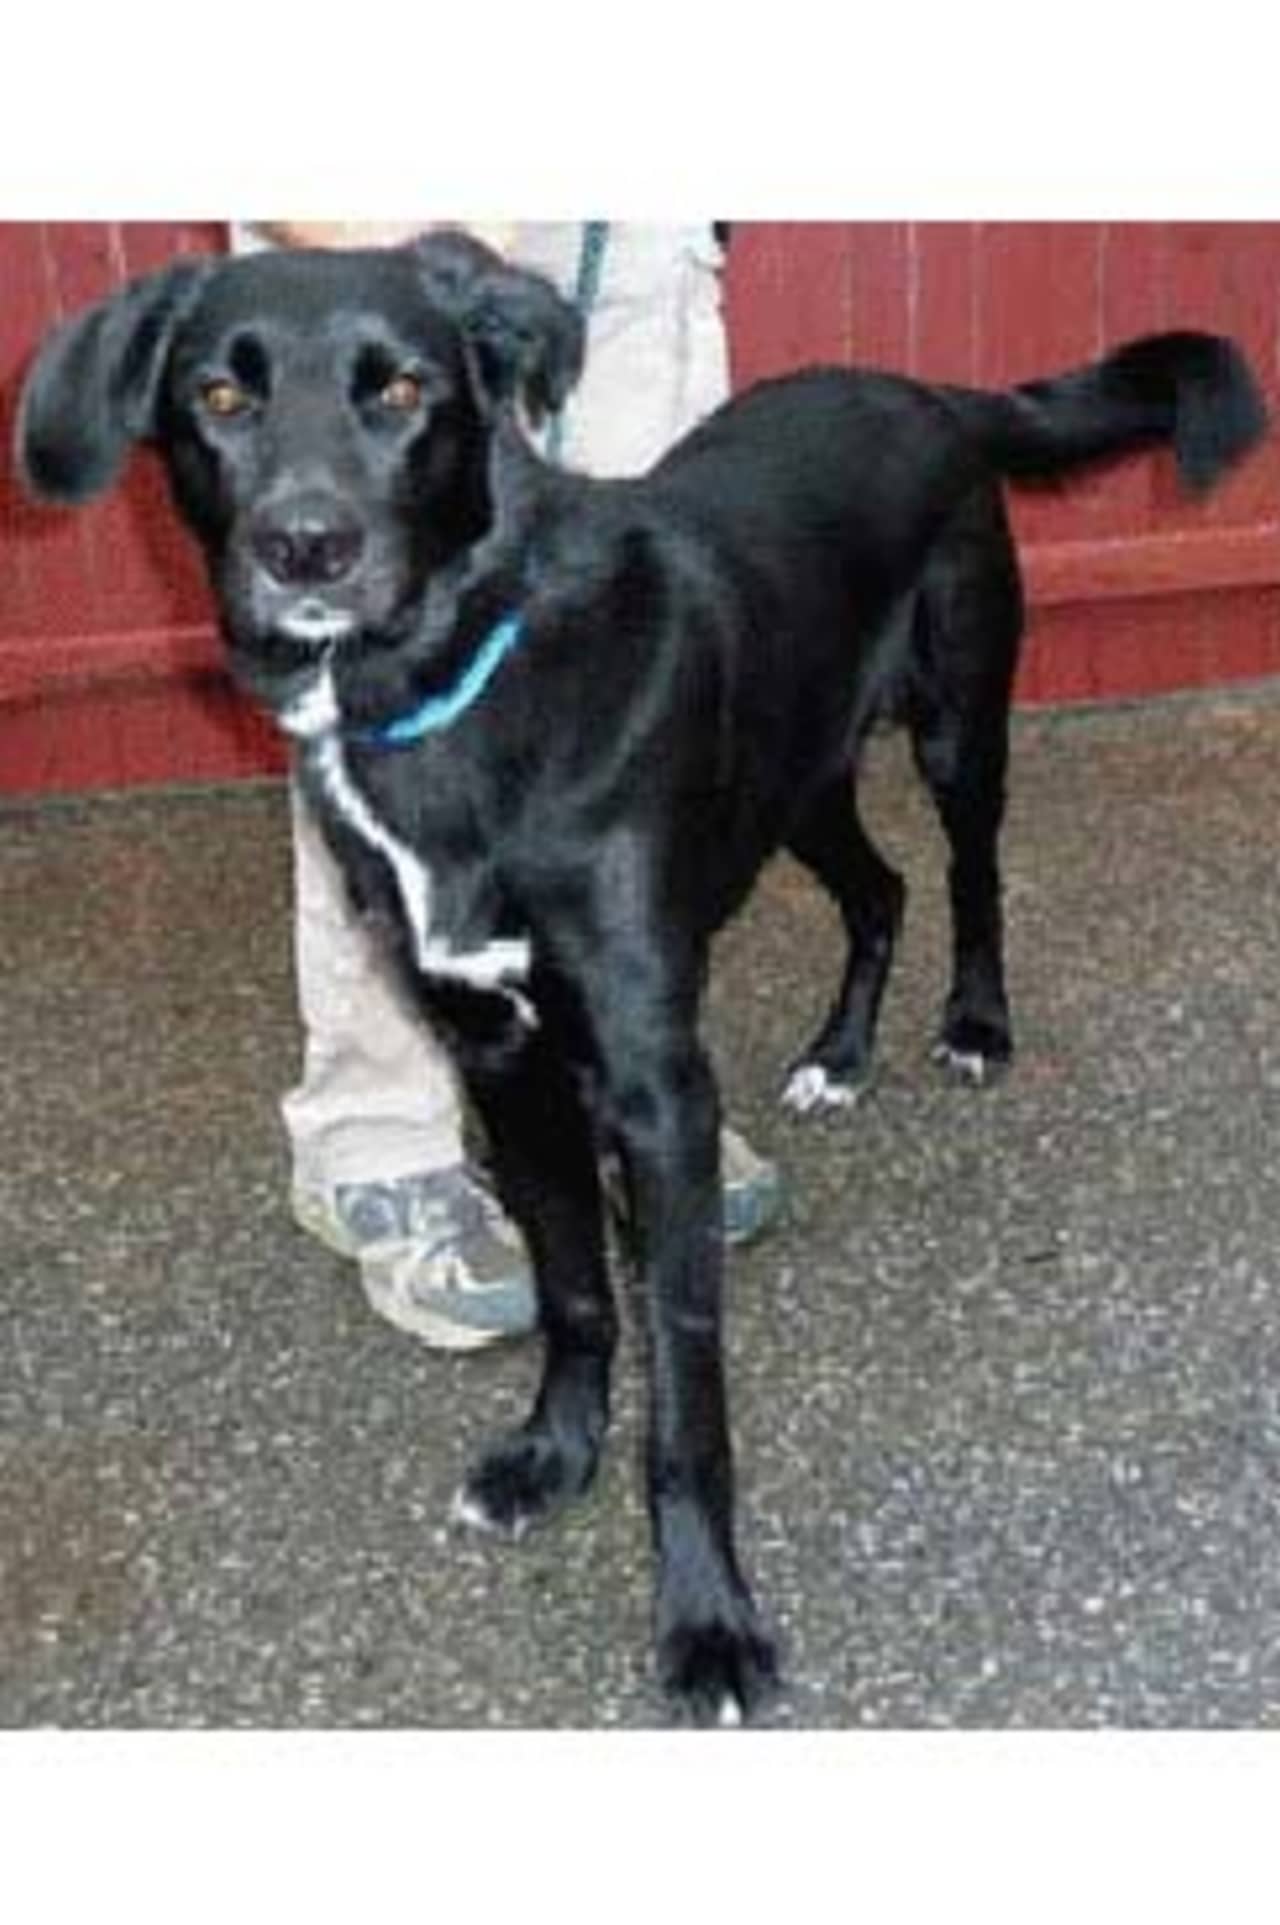 Denzel, a Lab/retreiver mix, is one of many adoptable pets available at the Putnam Humane Society in Carmel.